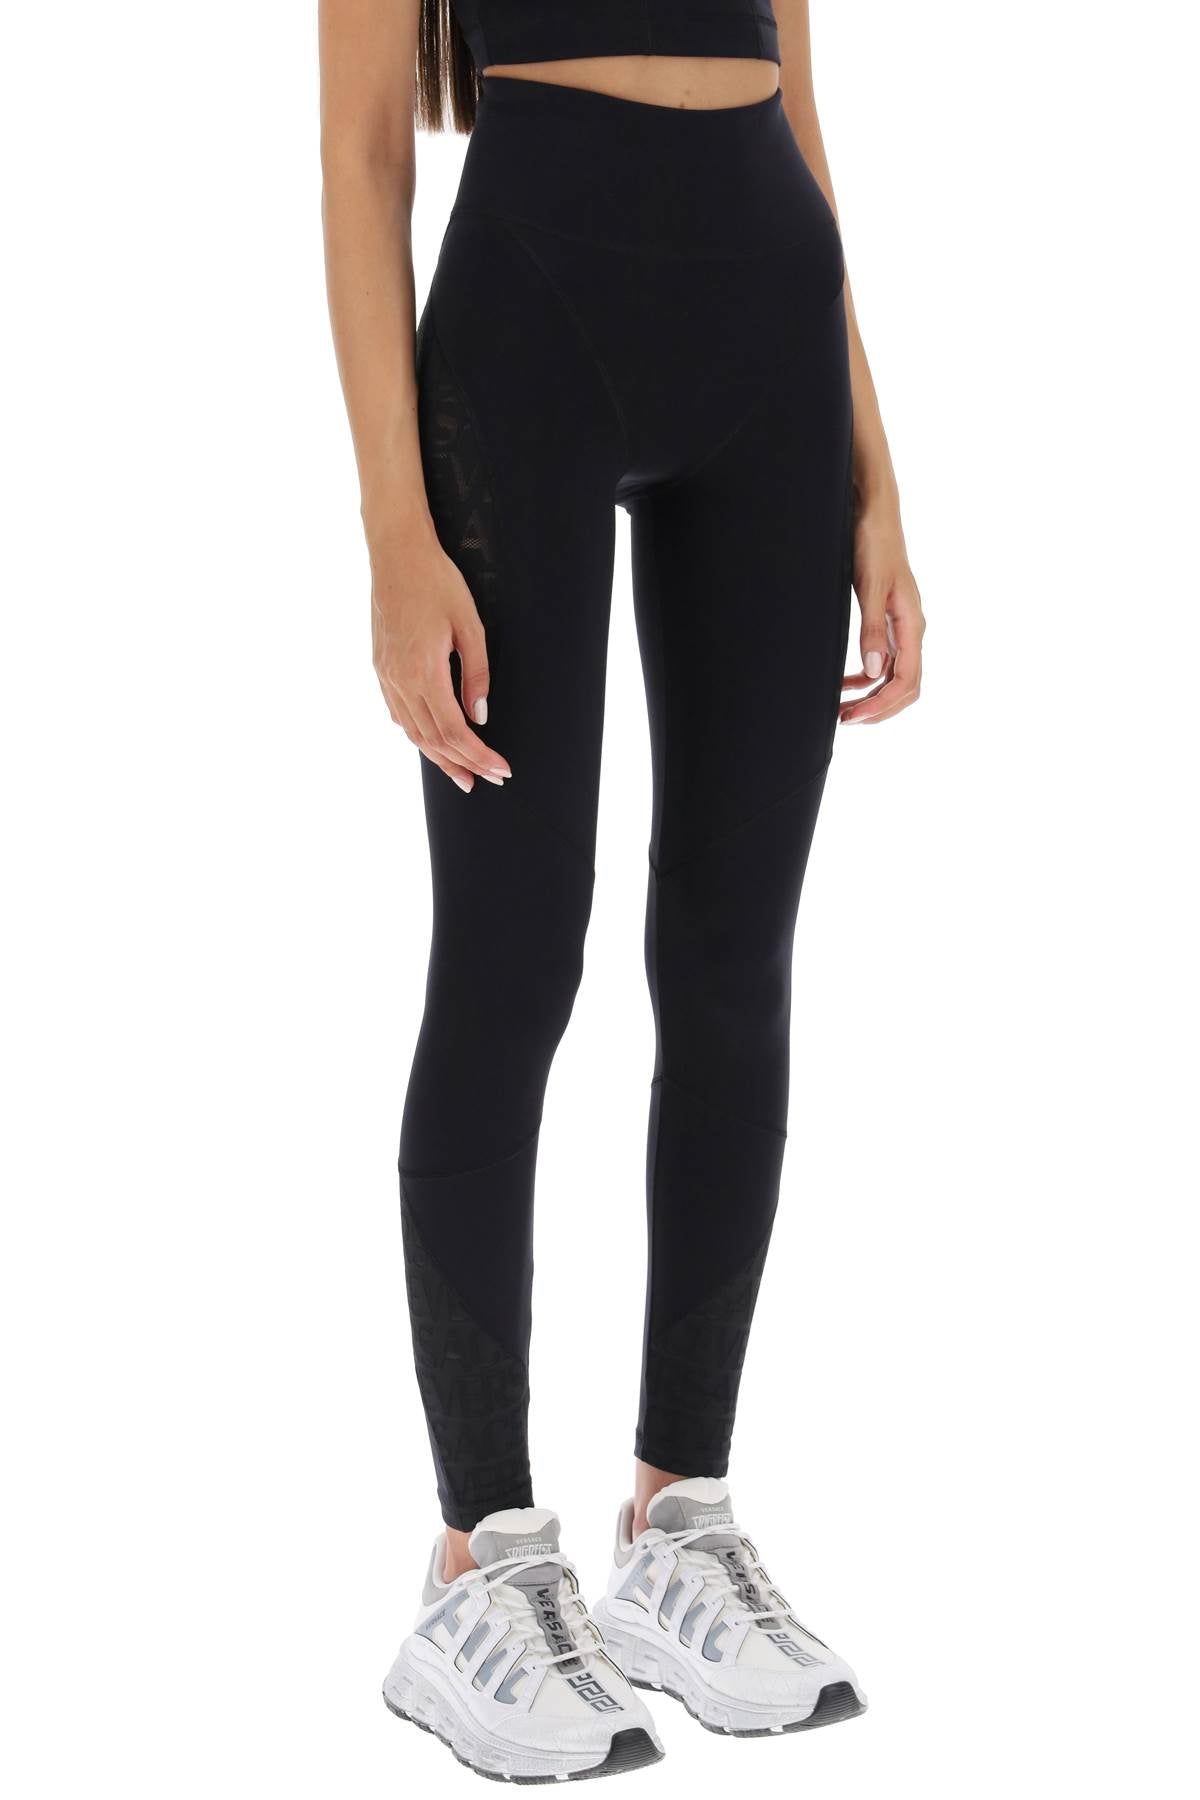 Versace sports leggings with lettering – Italy Station